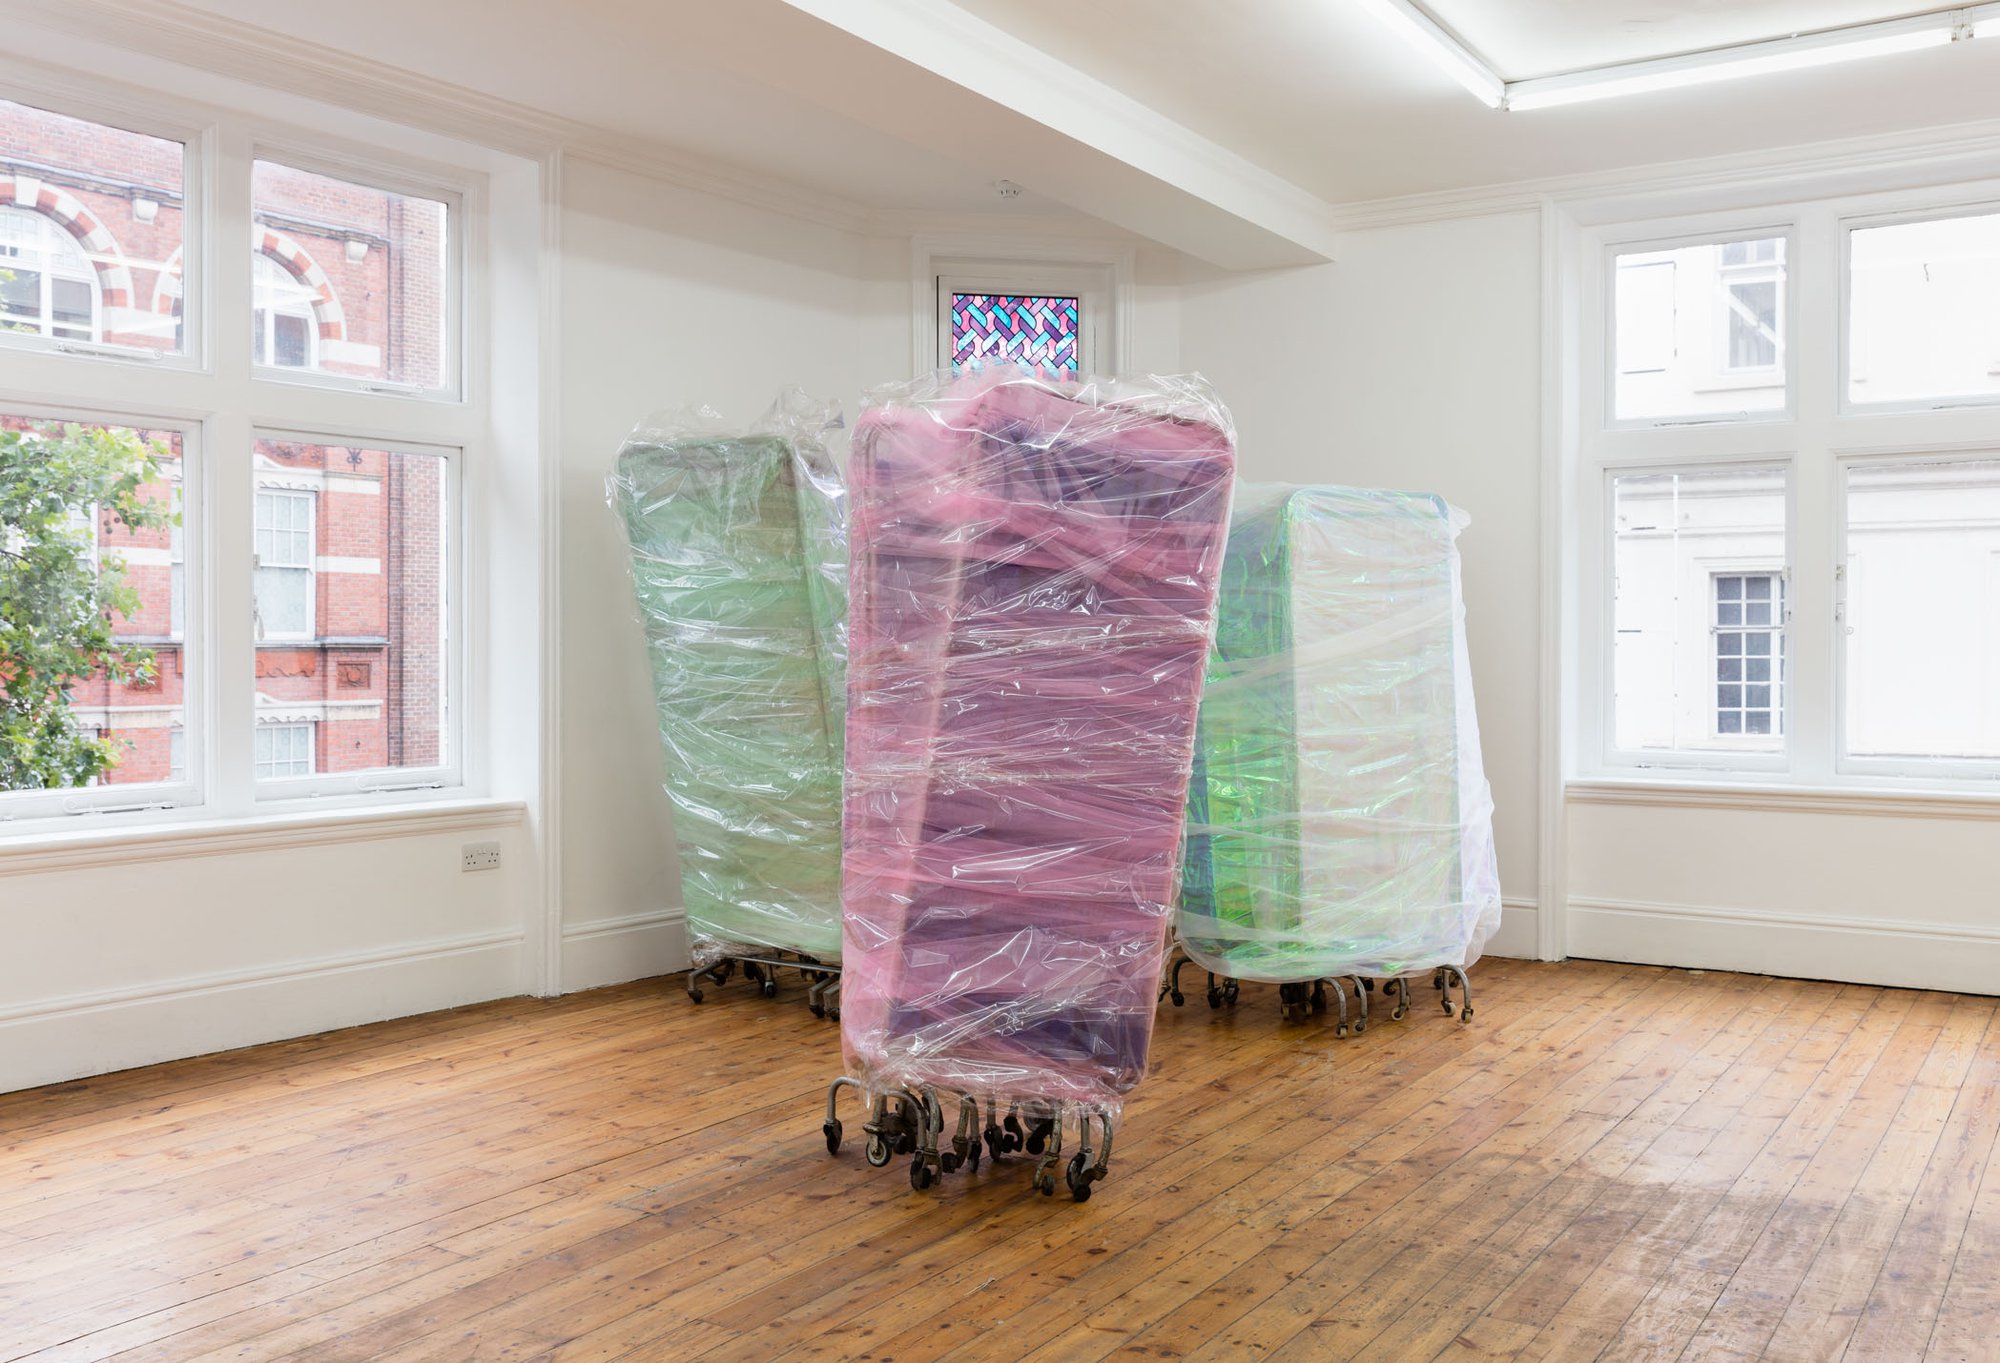 Ian Law, There was a body, I was there, was a body, medical privacy screens with soft toy fur fabric, curtain netting and organza, gift wrapped, 172 x 86 x 47 cm, 2016. Installation view, The Cypress Broke, Rodeo, London, 2016